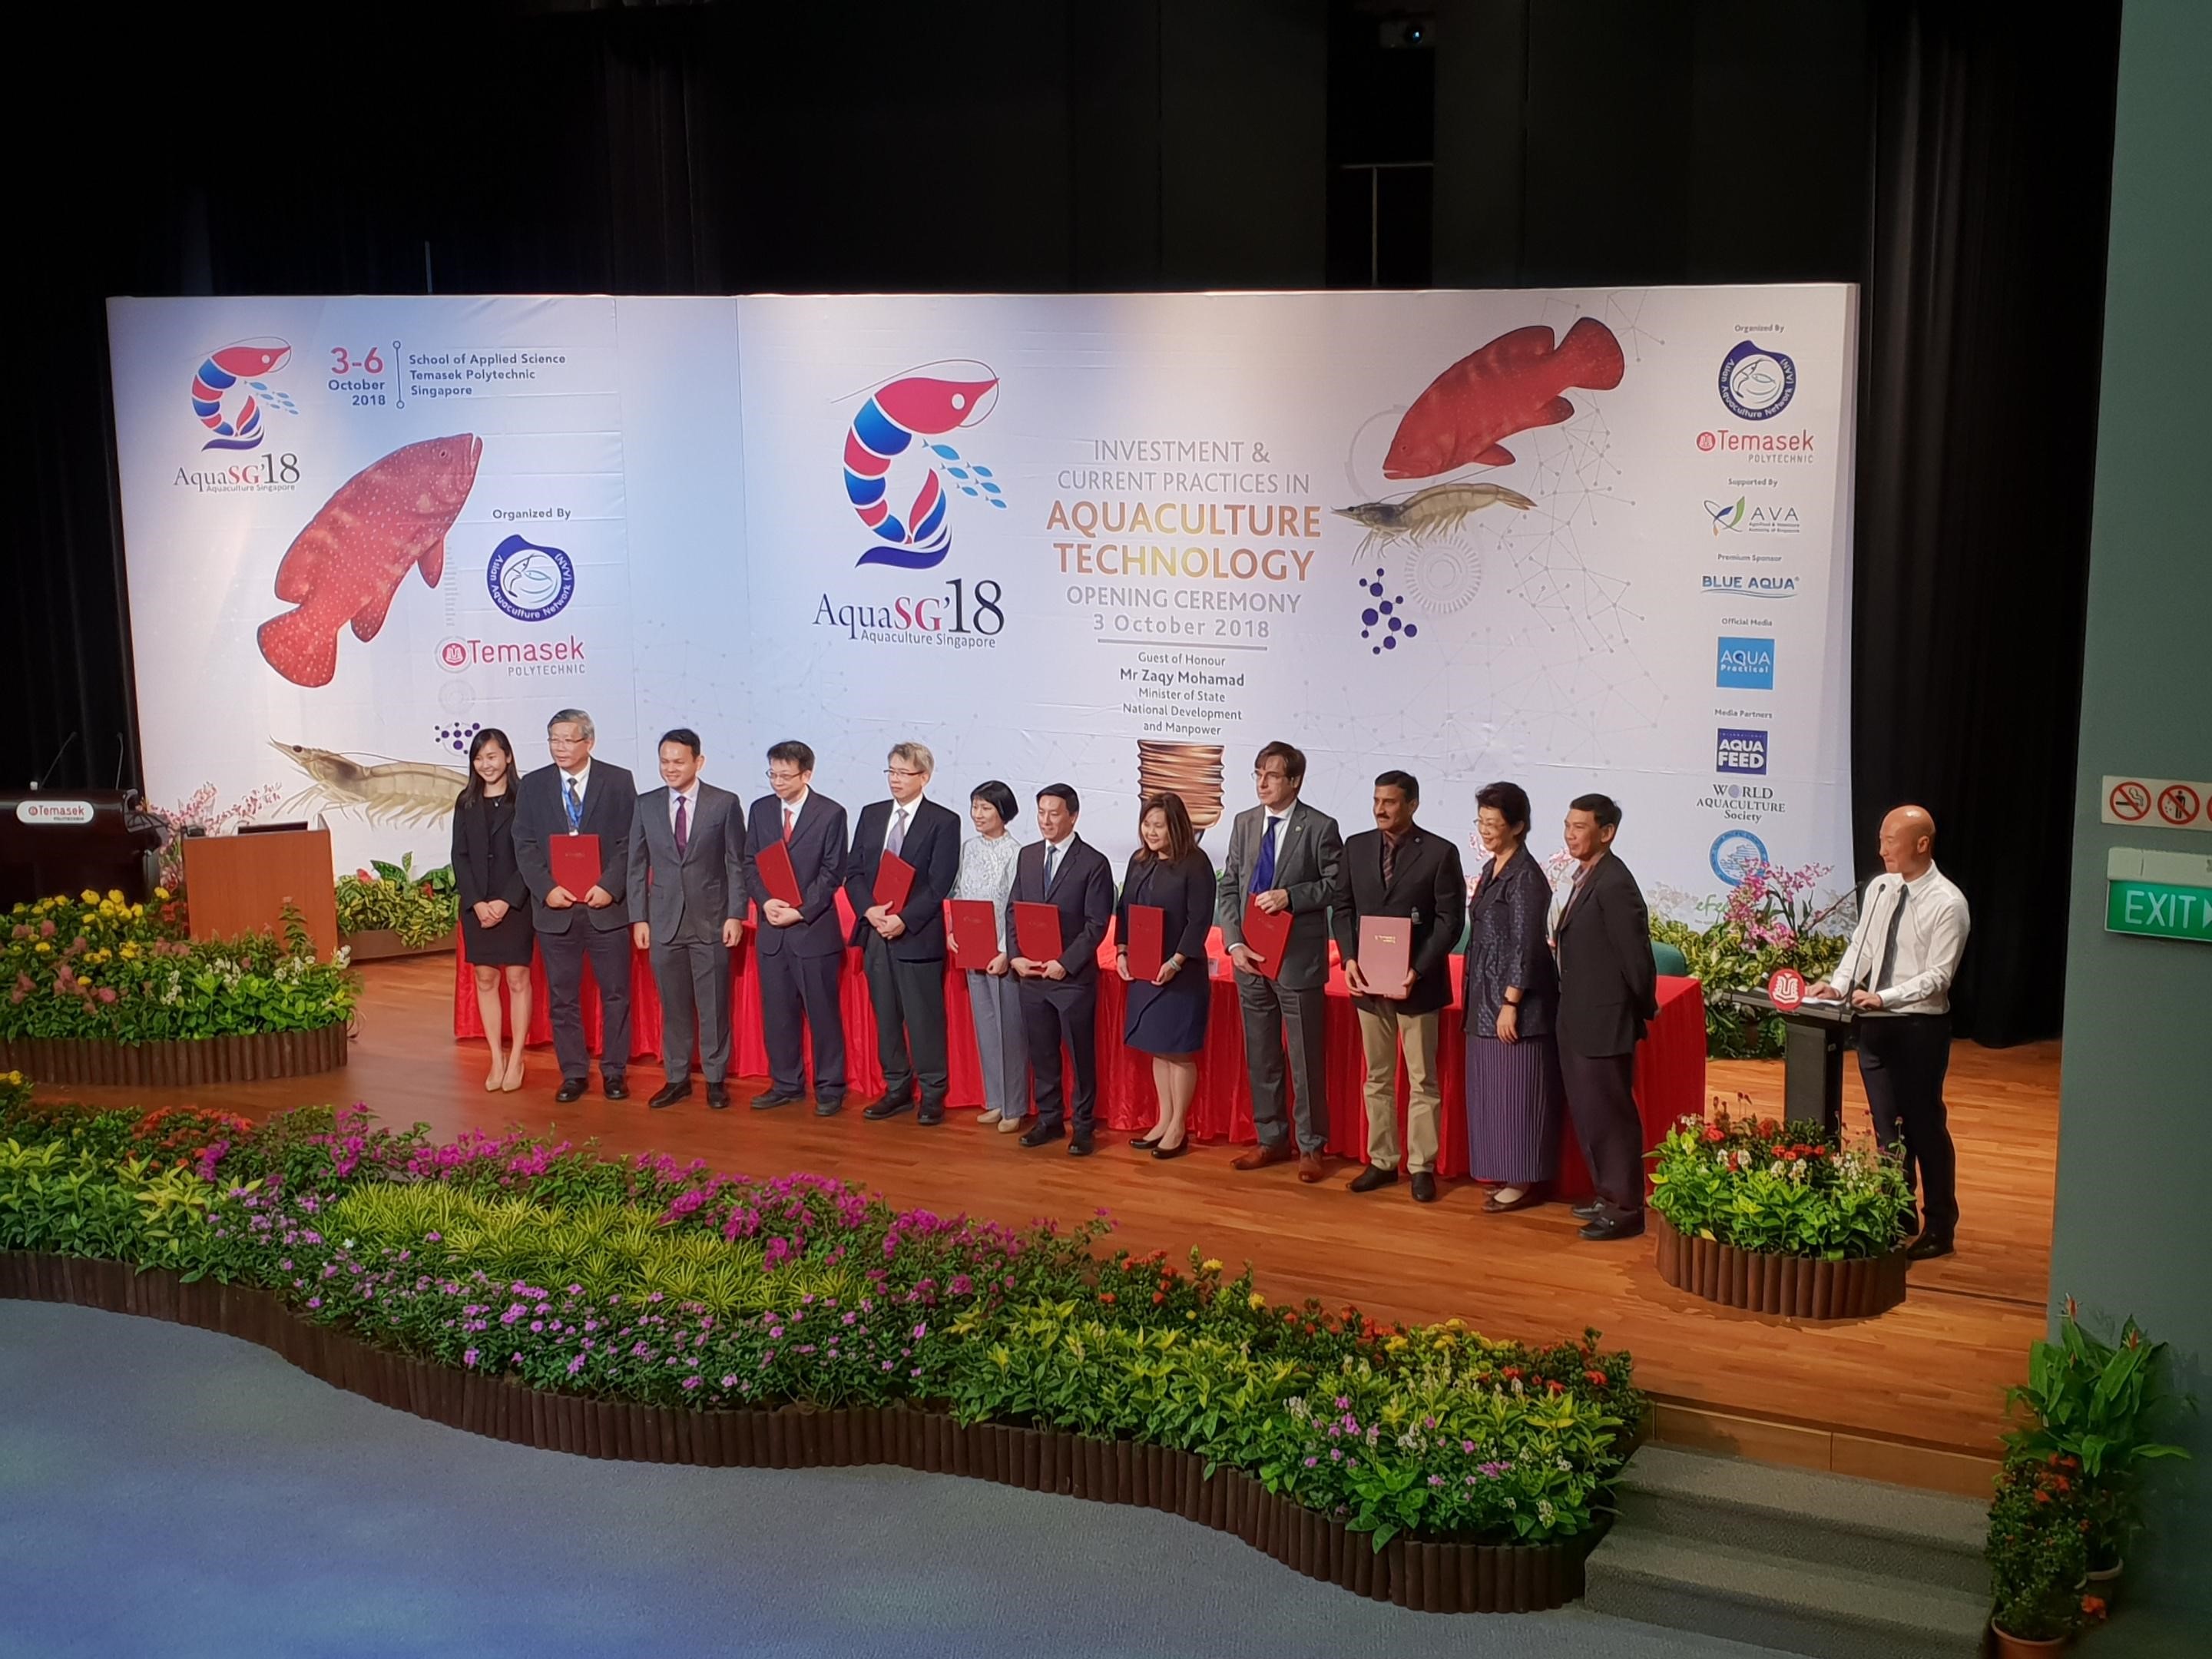 Associate Professor Abhishek Bhati with representatives from other institutions at the Opening Ceremony of AquaSG’18, Temasek Polytechnic, Singapore